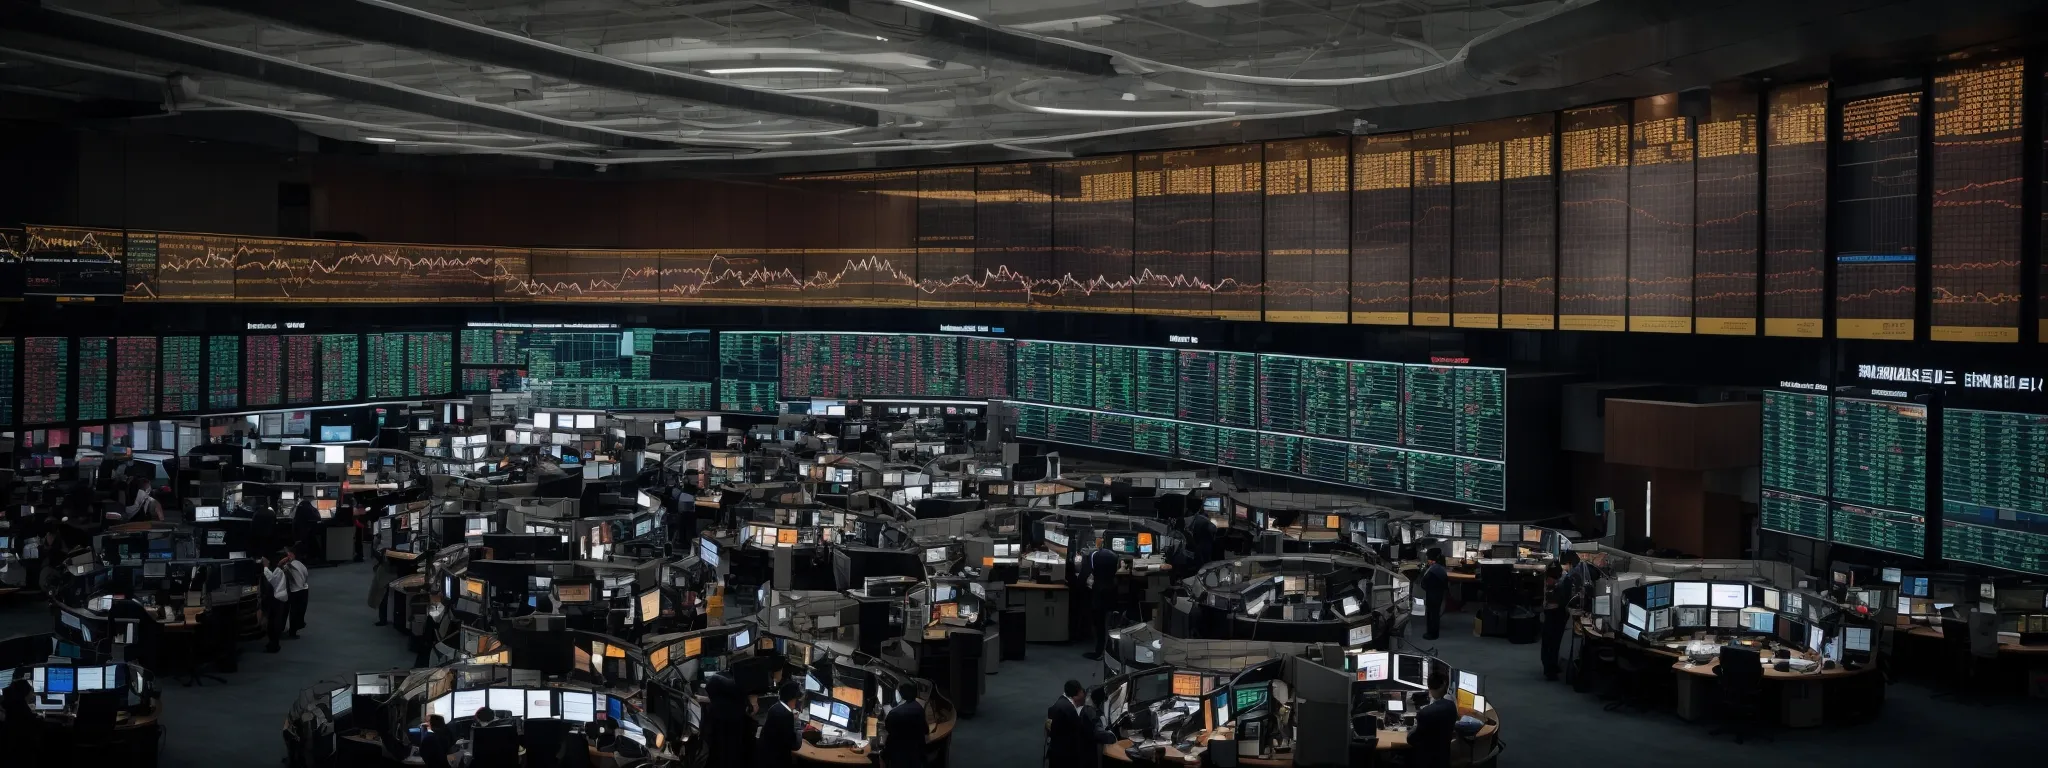 a bustling stock trading floor with screens displaying fluctuating financial data.